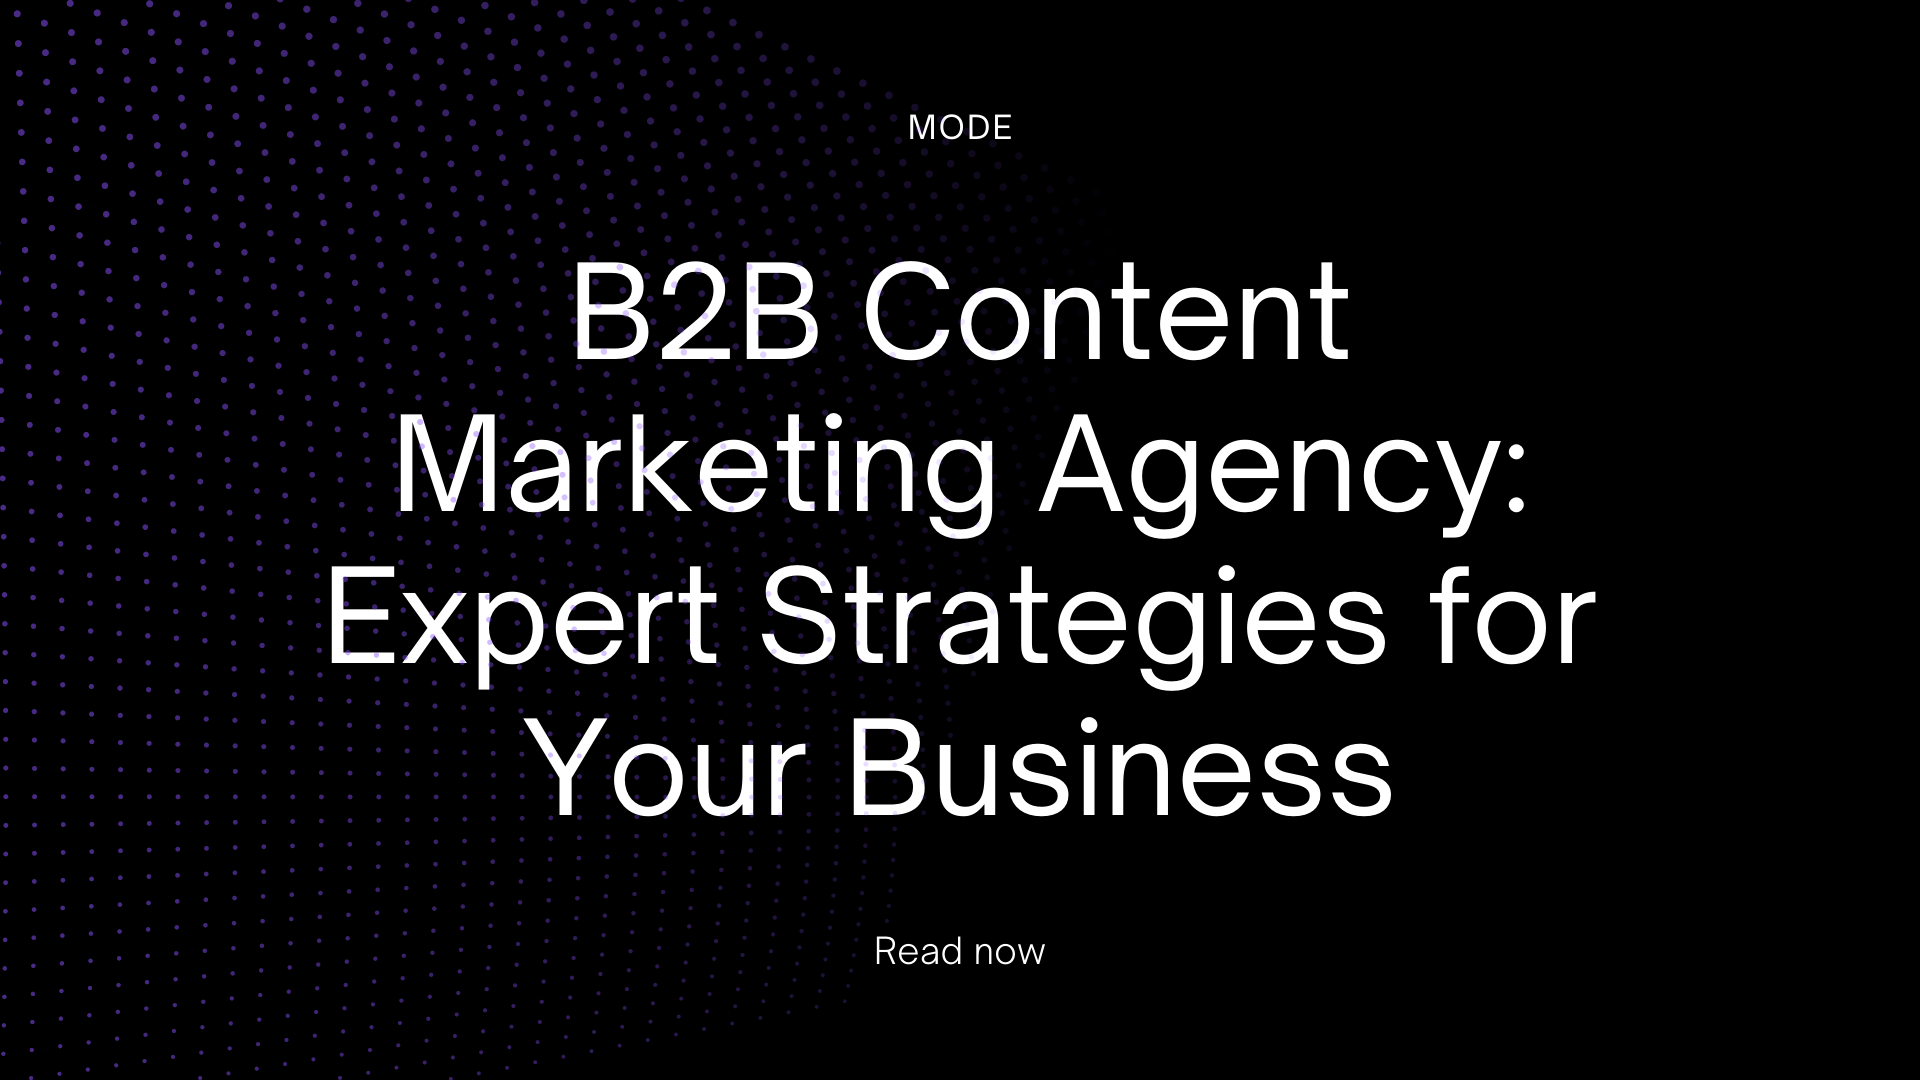 B2B Content Marketing Agency: Expert Strategies for Your Business